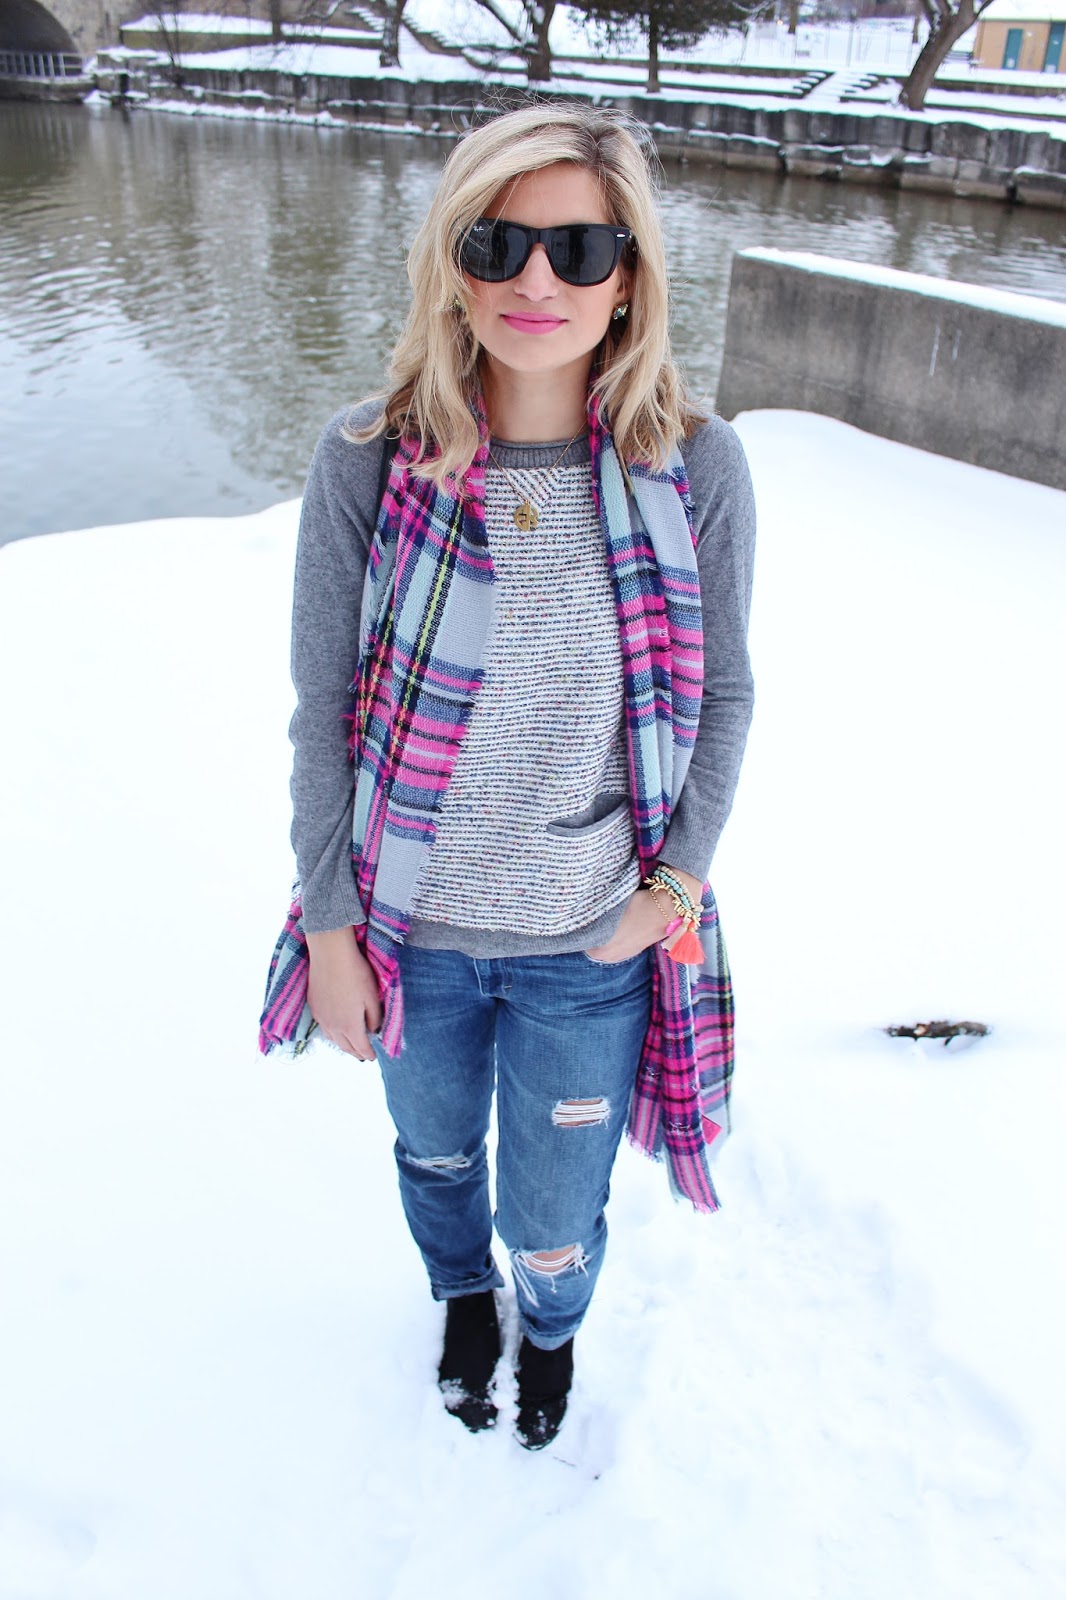 bijuleni- Boyfriend jeans with plaid colourful scarf and sweater